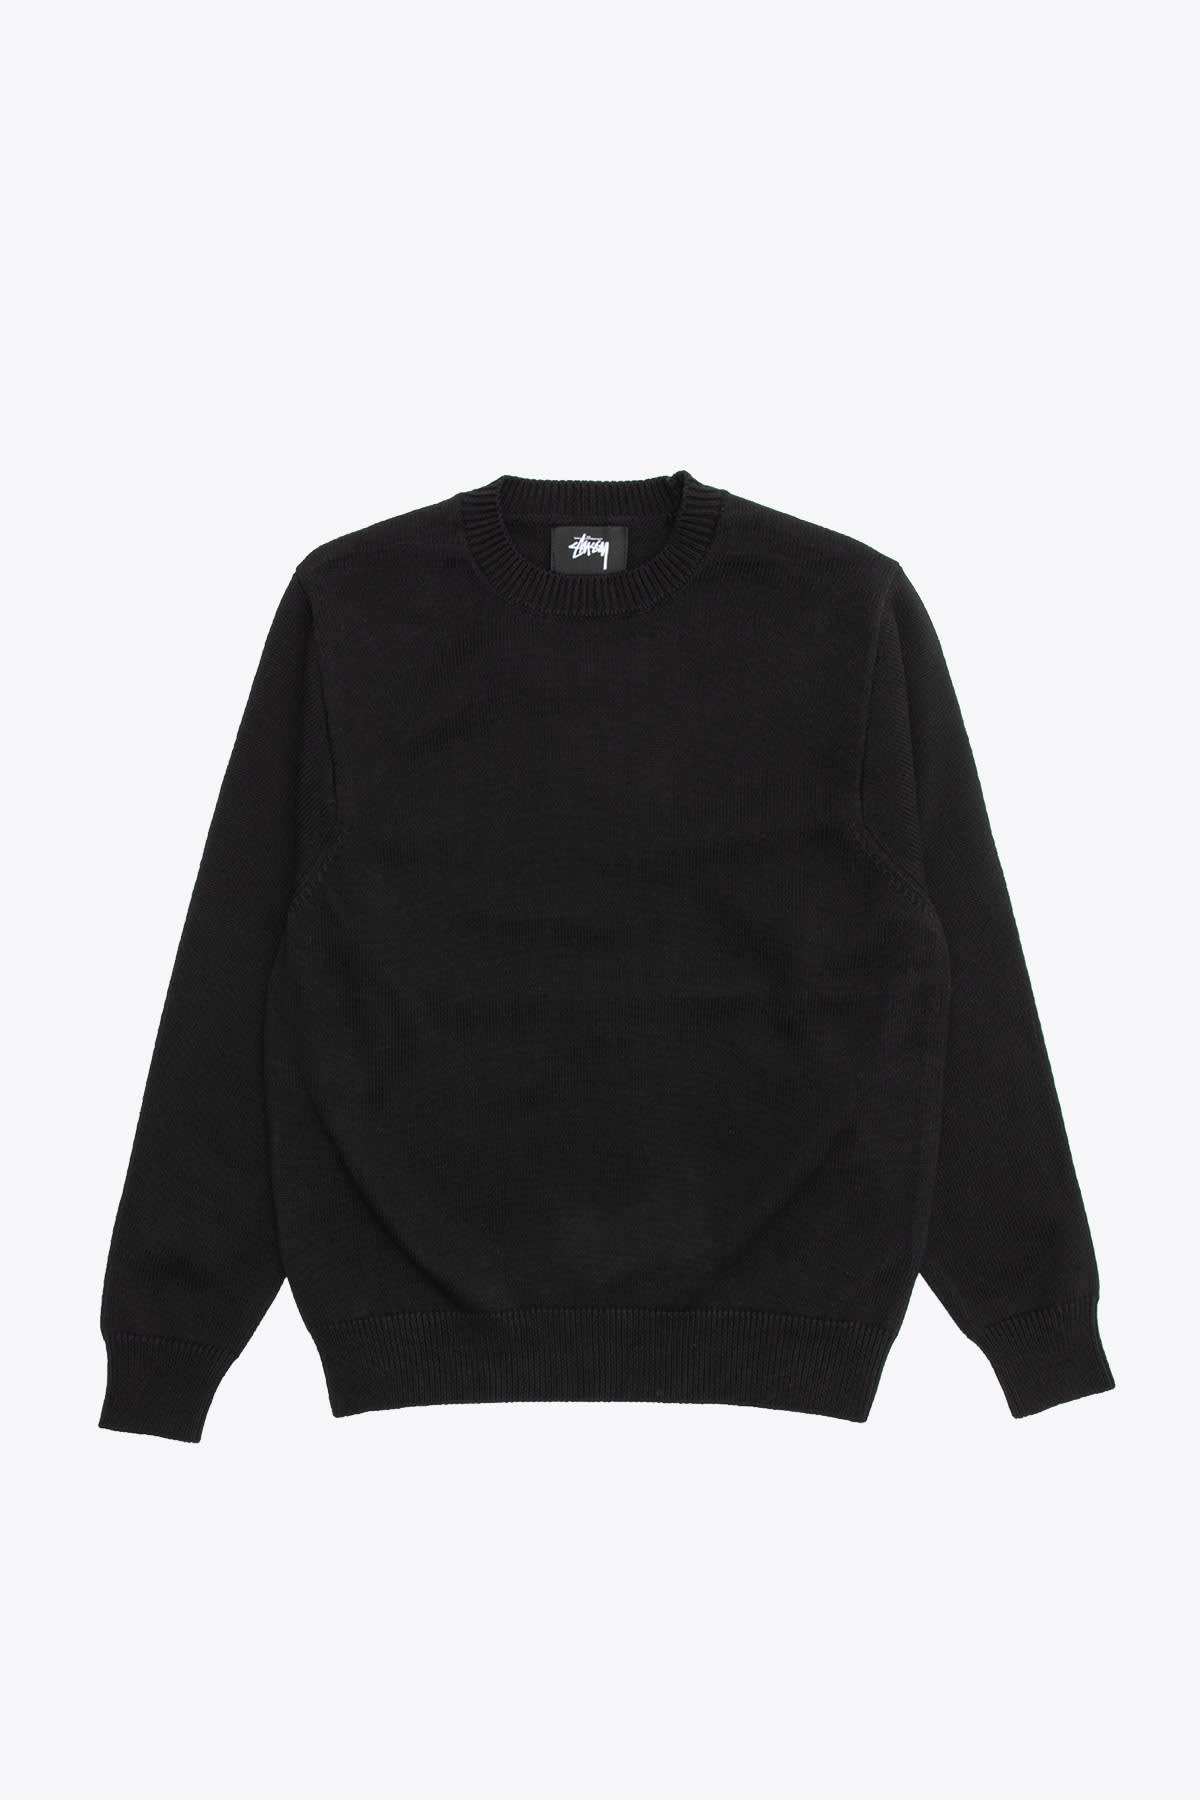 Stussy Bent Crown Sweater Black cotton knitted sweater with back crown - Bent crown sweater